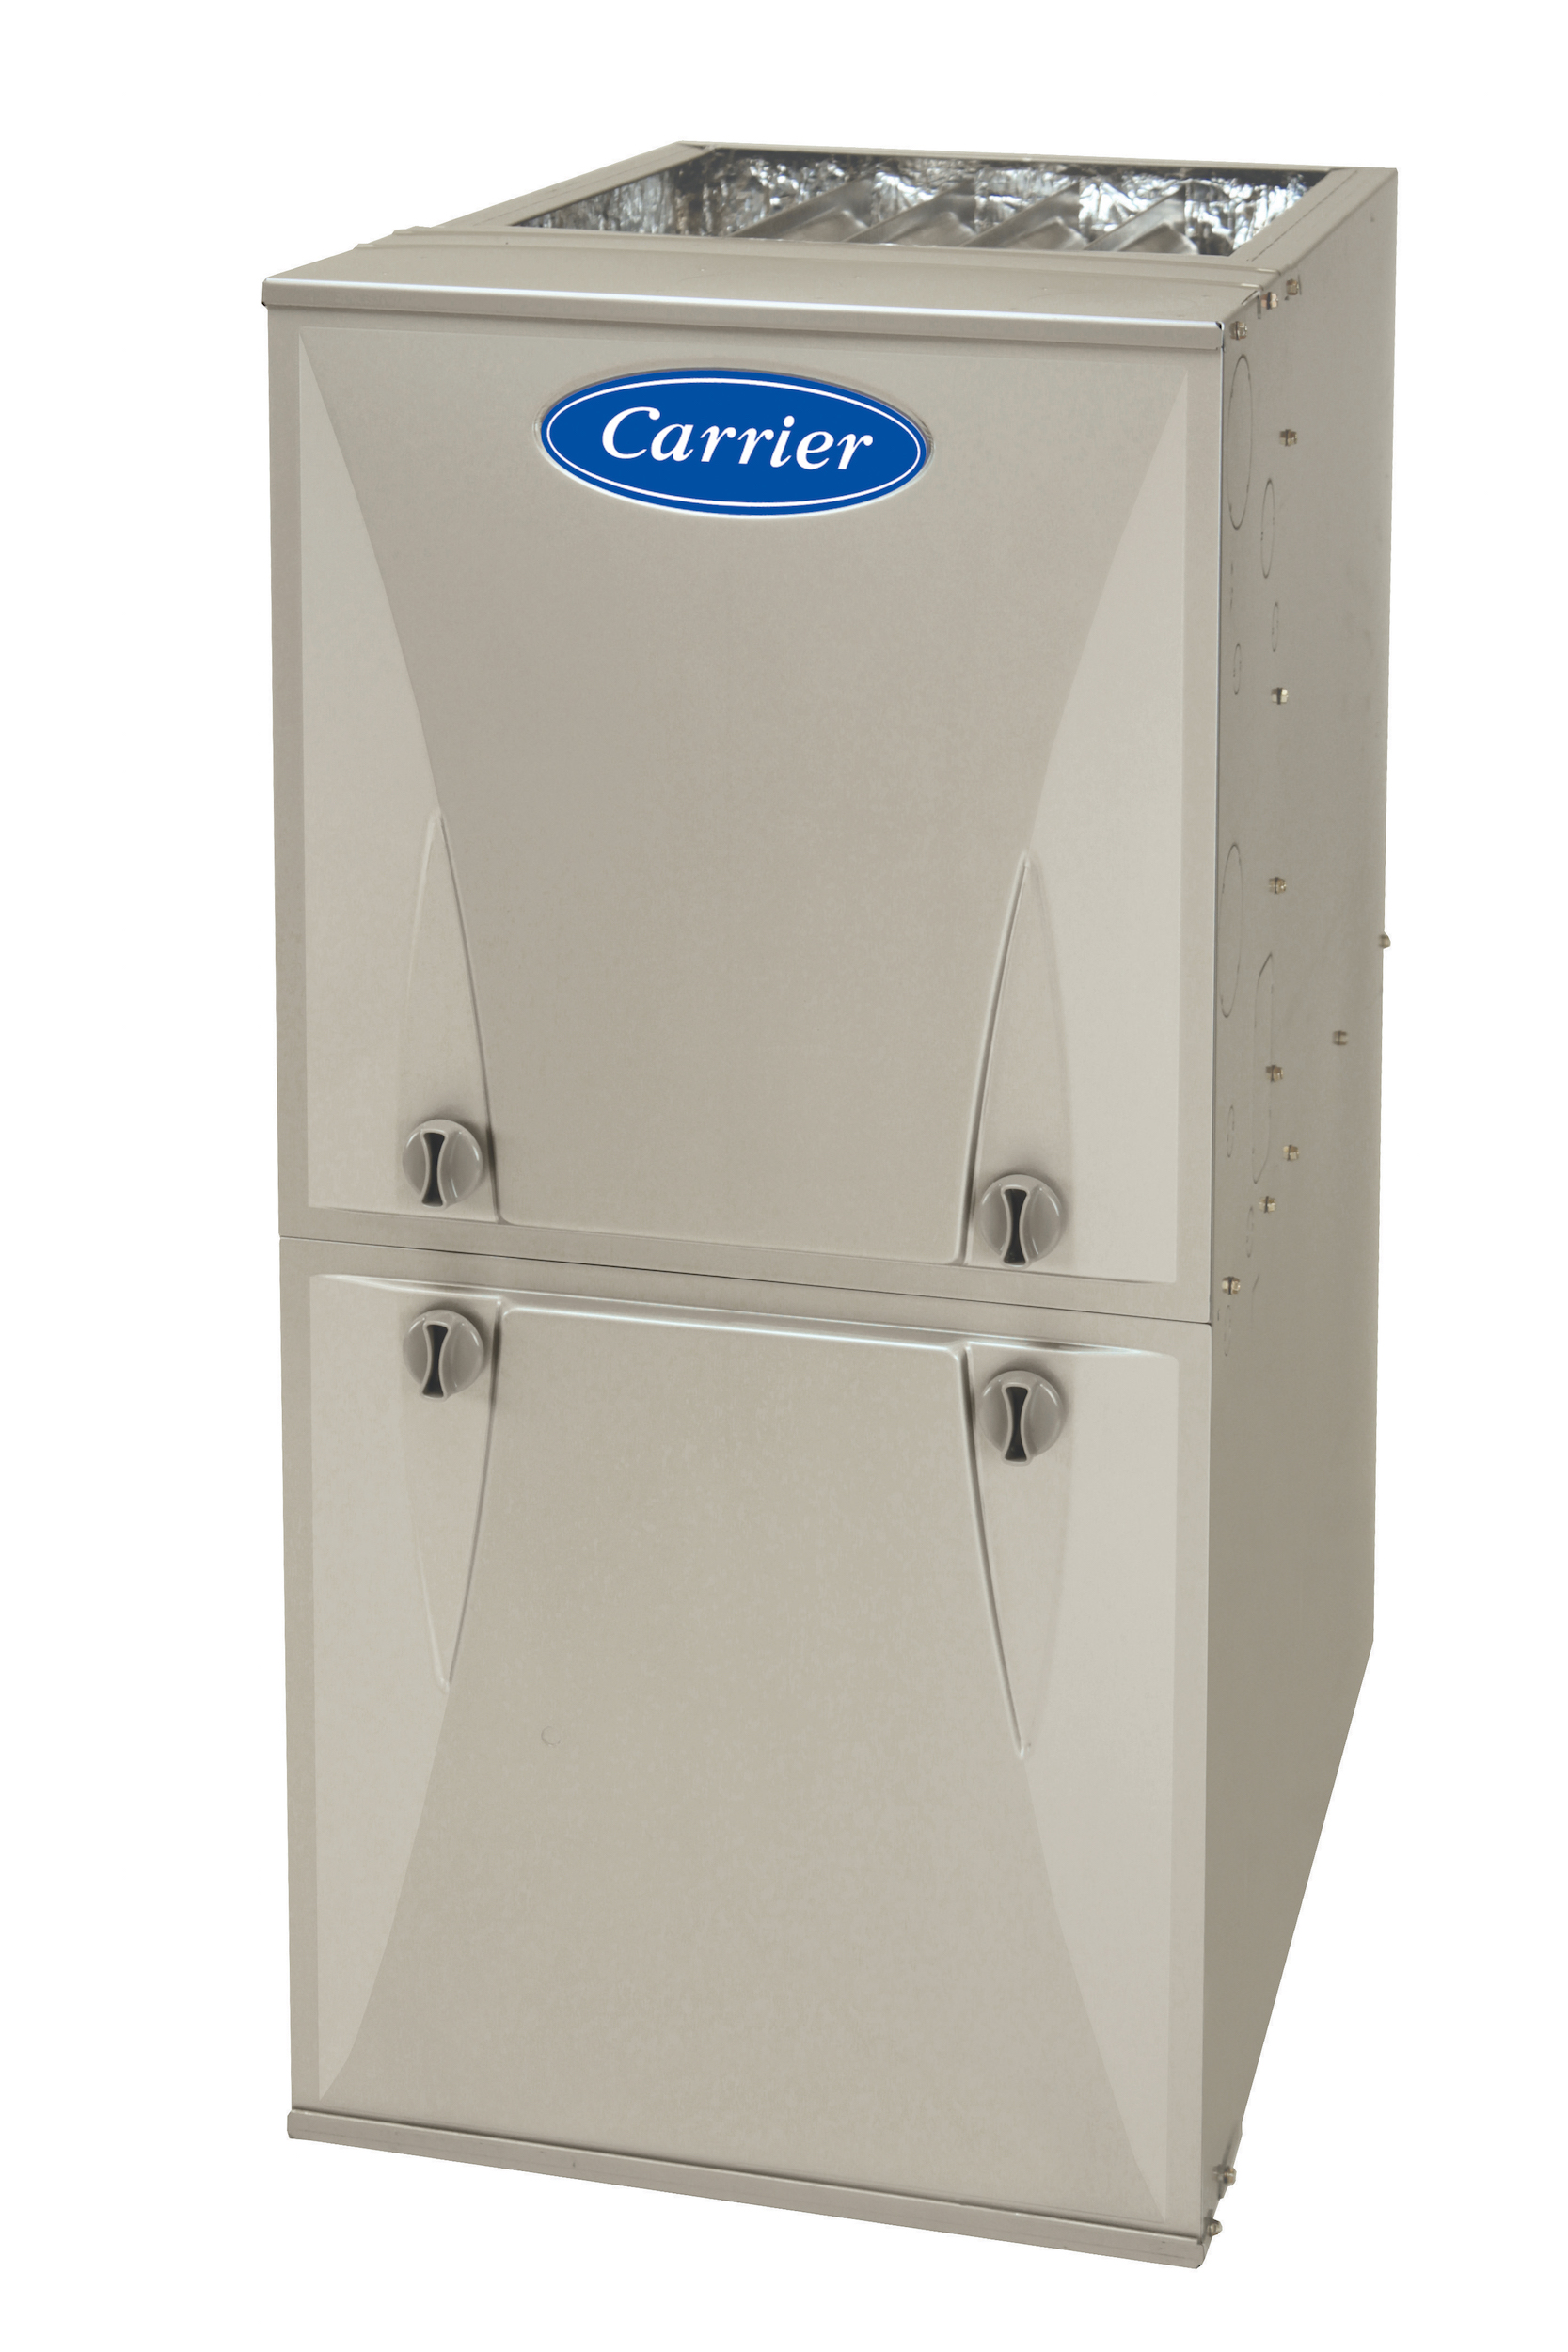 carrier-comfort-92-gas-furnace-parts